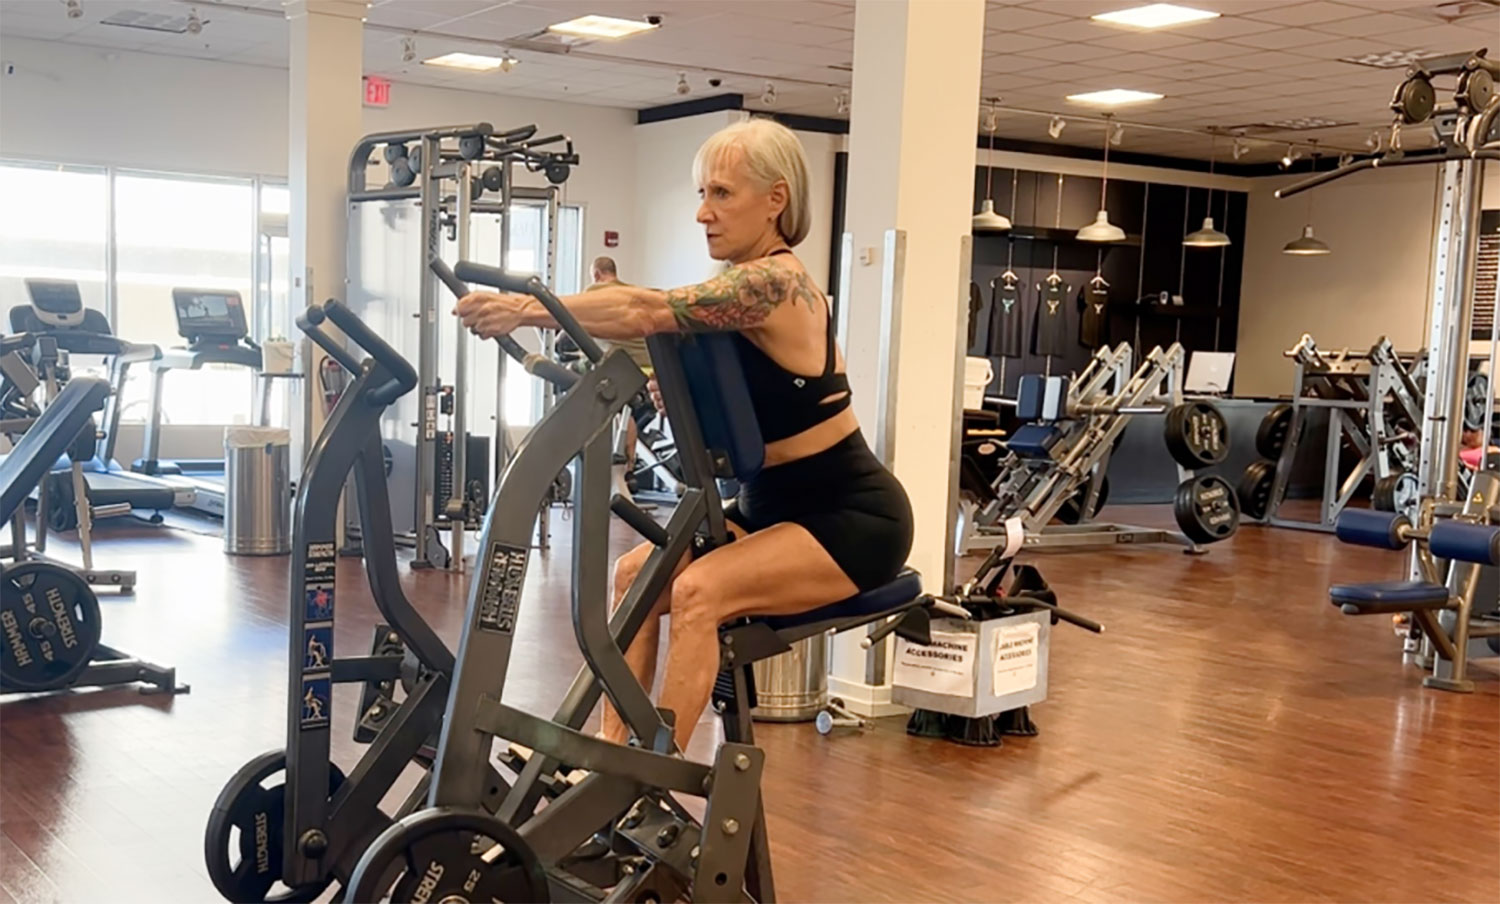 A strong woman is sitting on a stationary bike in a silver gym.